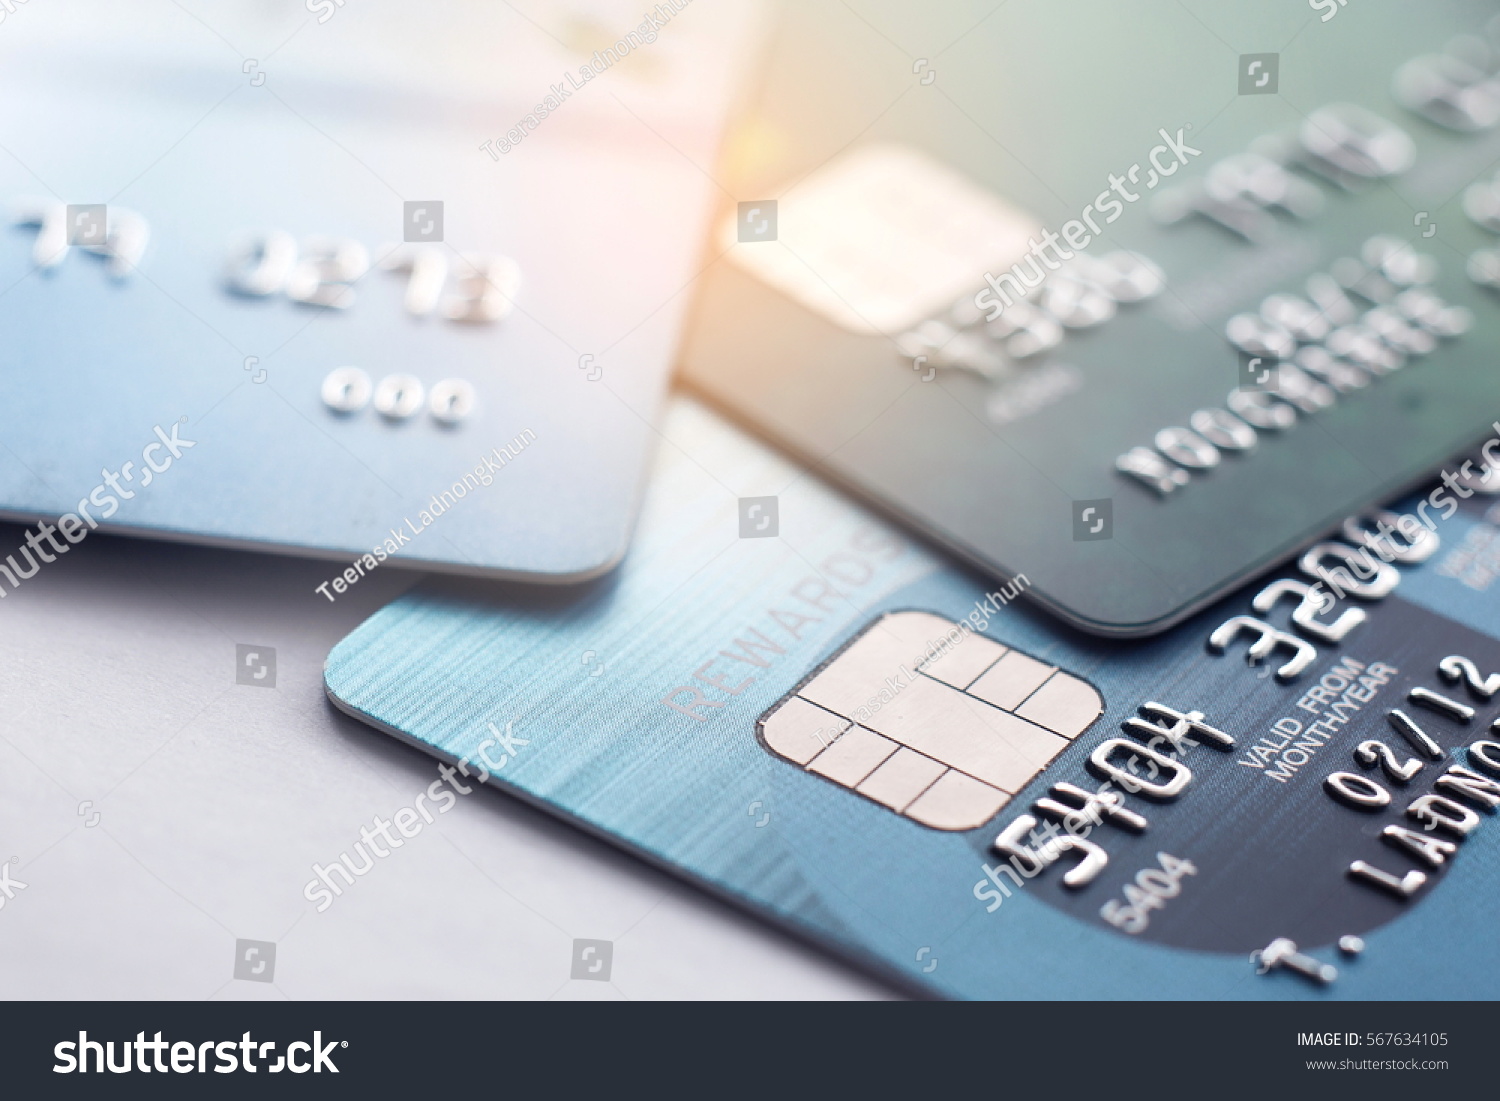 Credit card close up shot with selective focus for background. #567634105